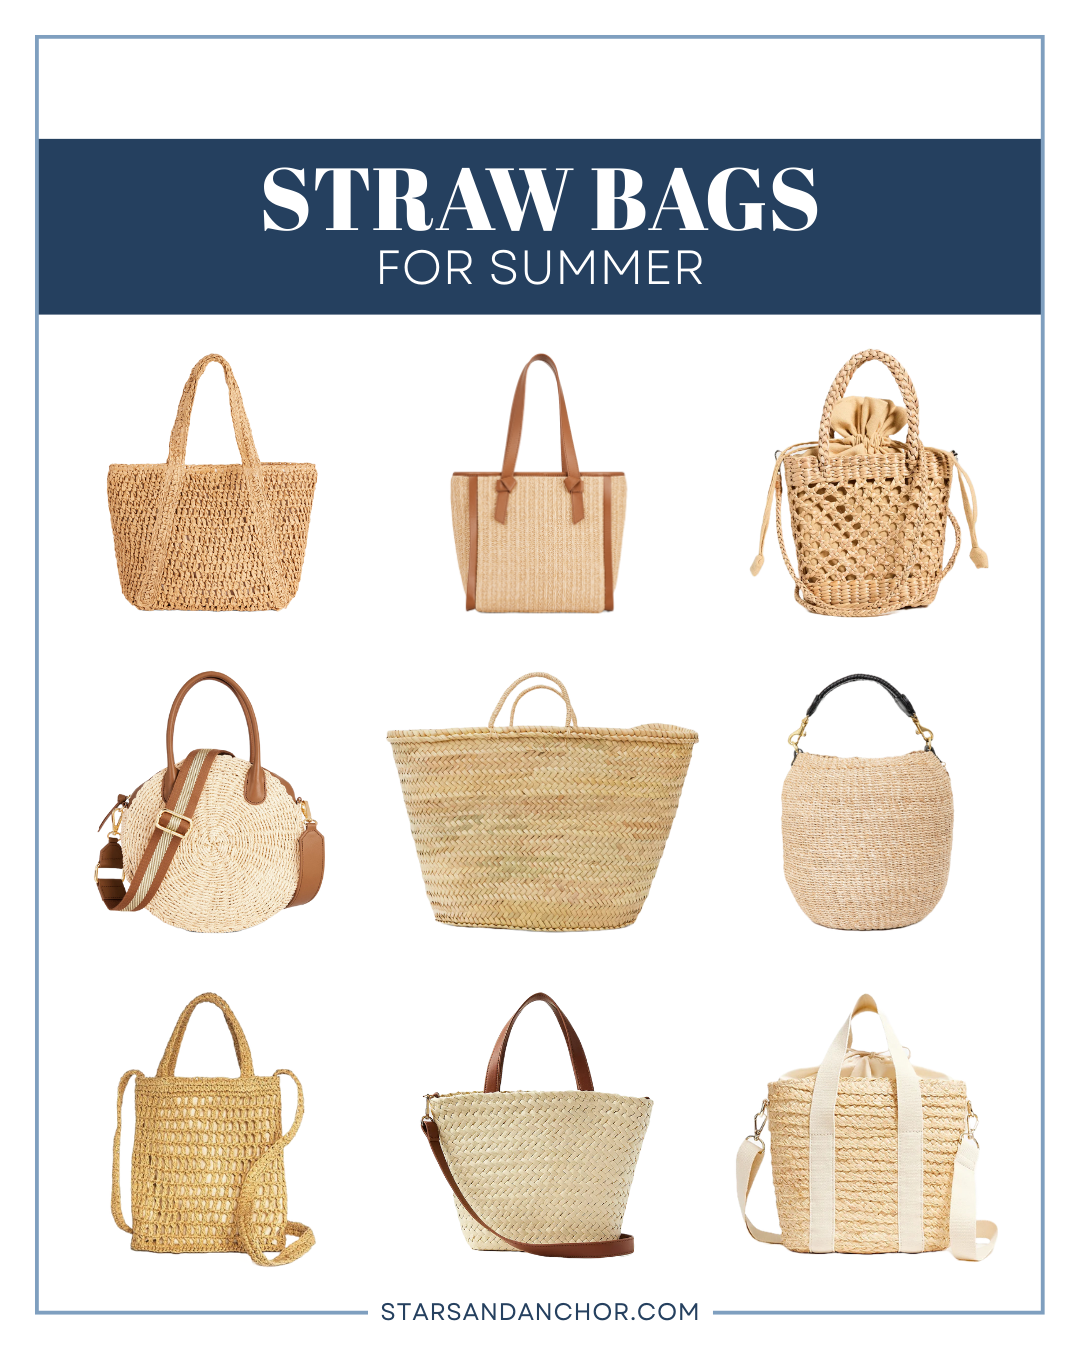 A graphic that says Straw Bags for Summer from Stars and Anchor dot com, with images of 9 different woven straw bags.